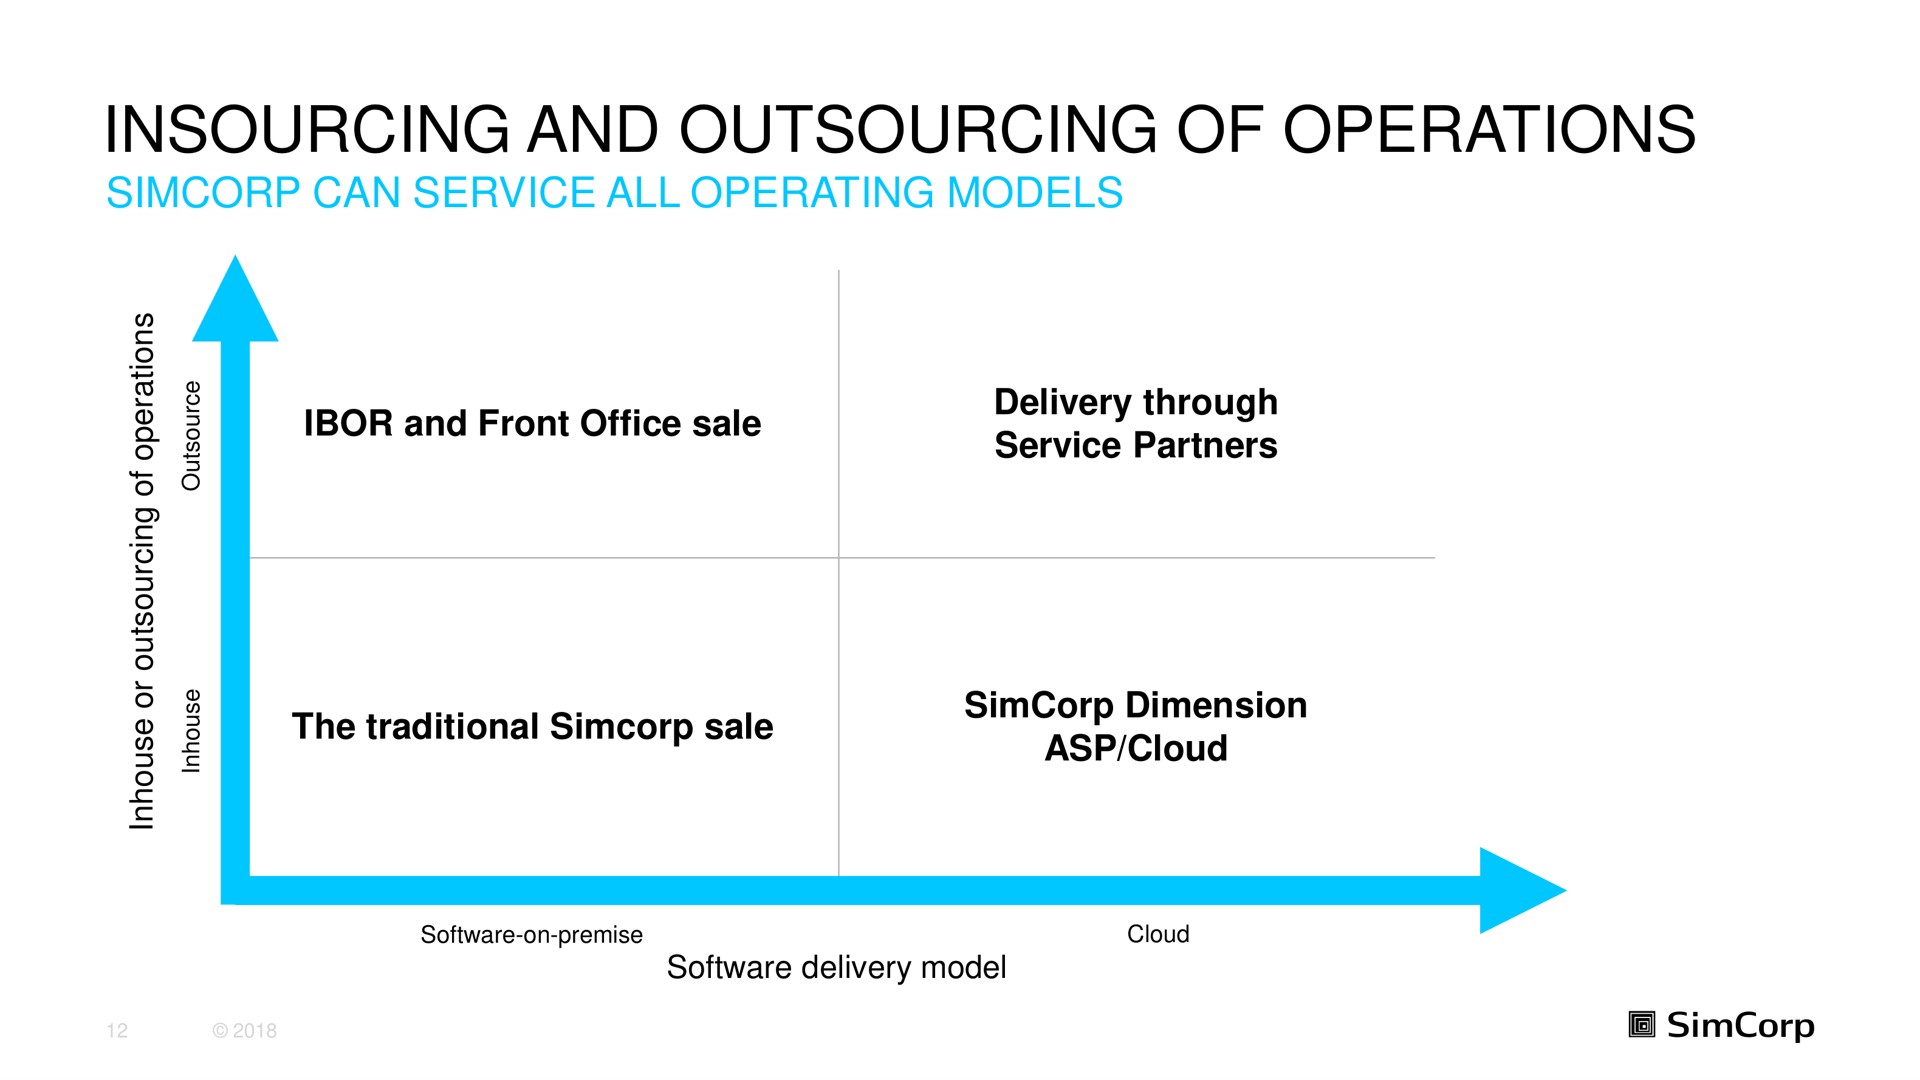 and of operations | SimCorp